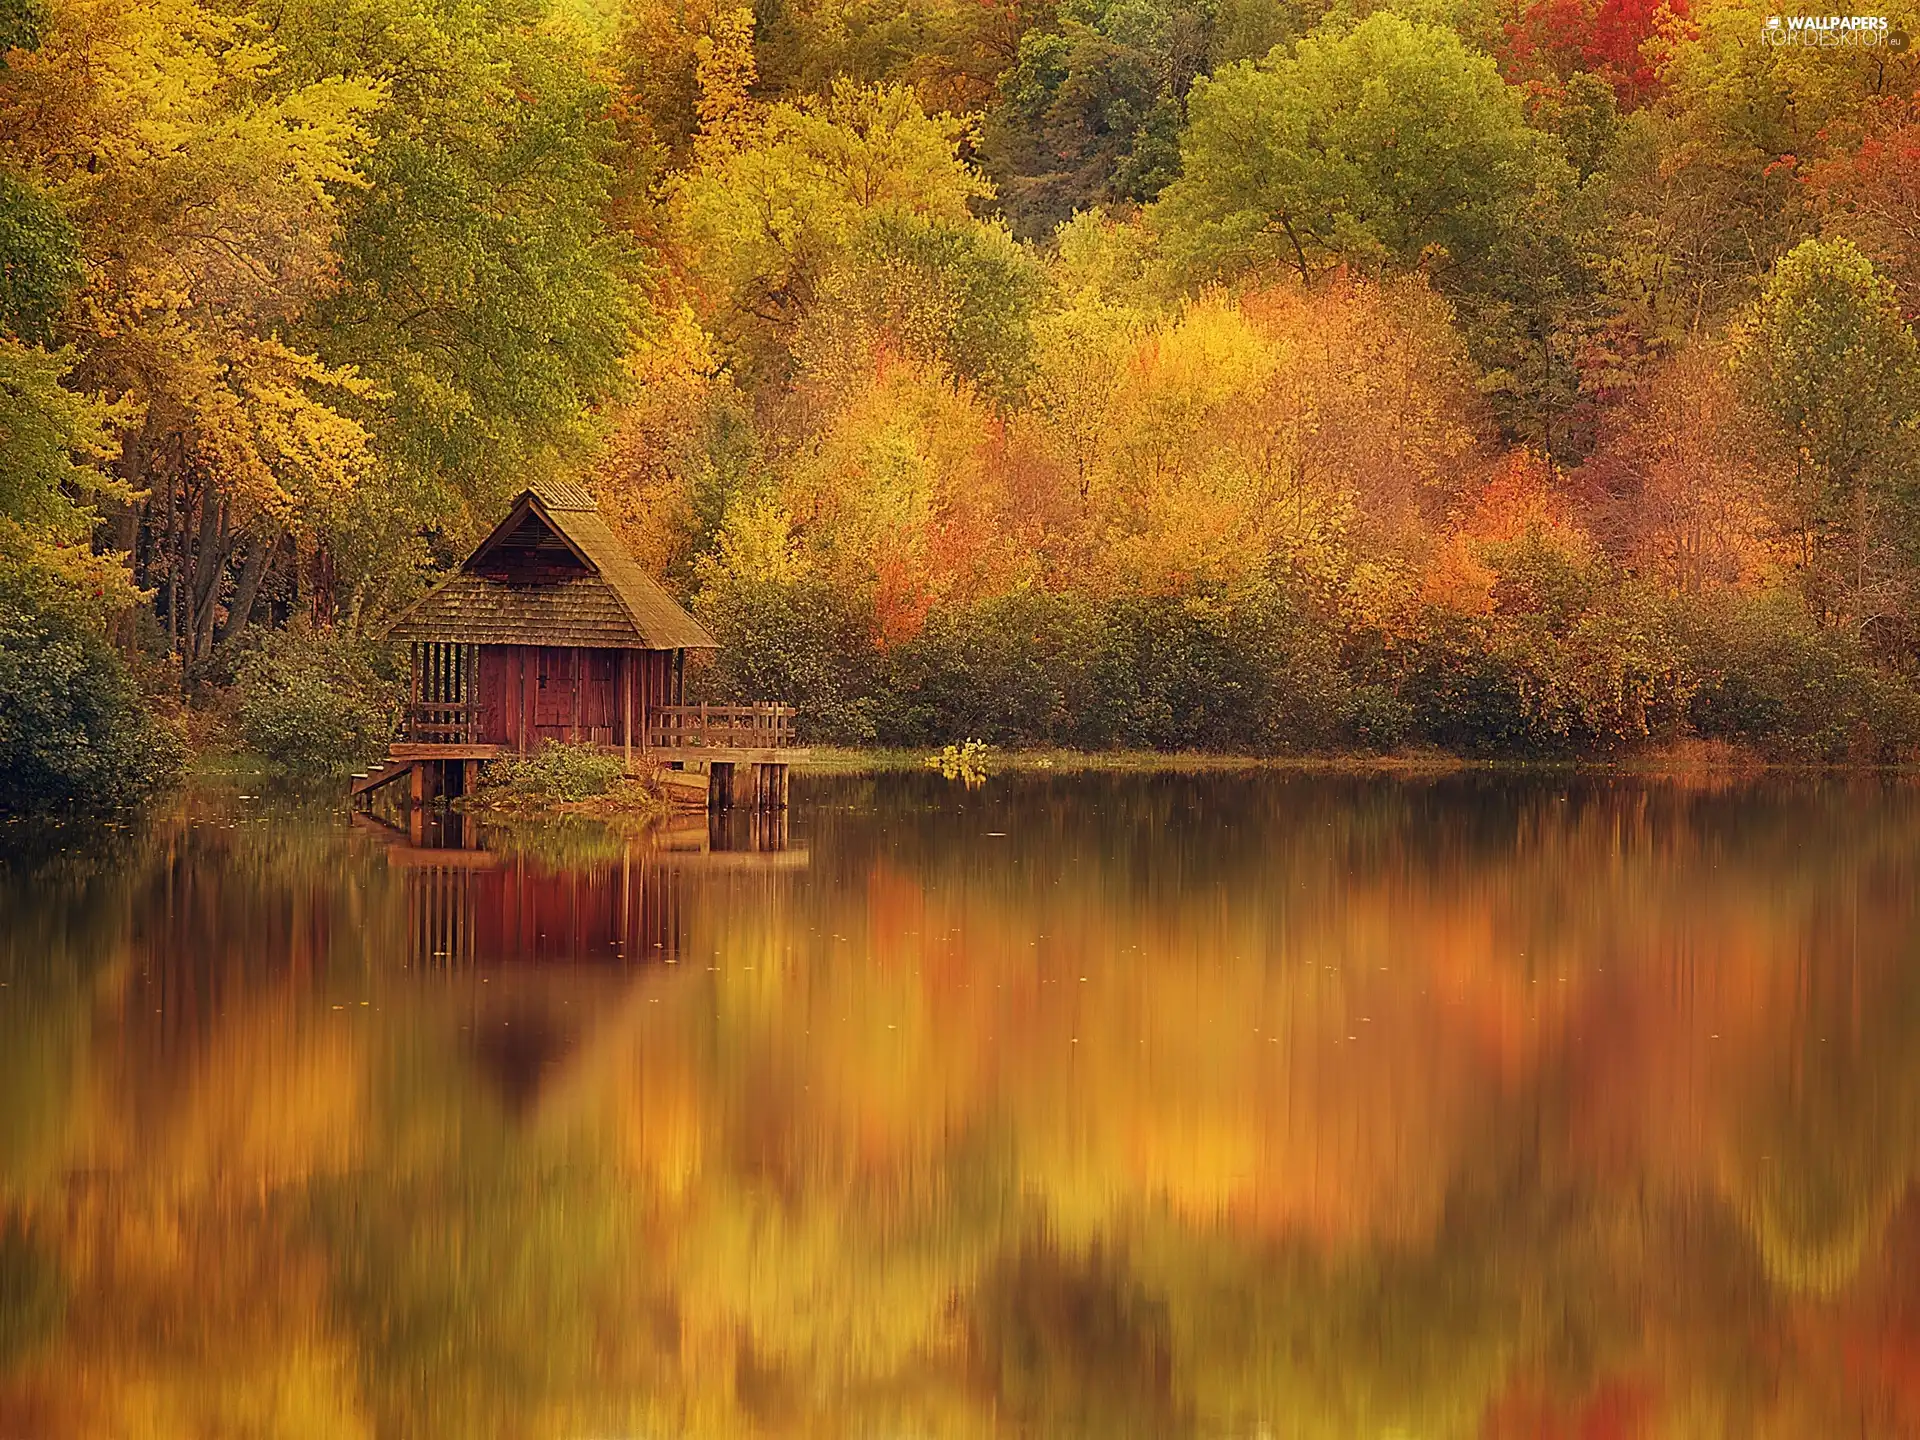 viewes, lake, reflection, autumn, Home, trees